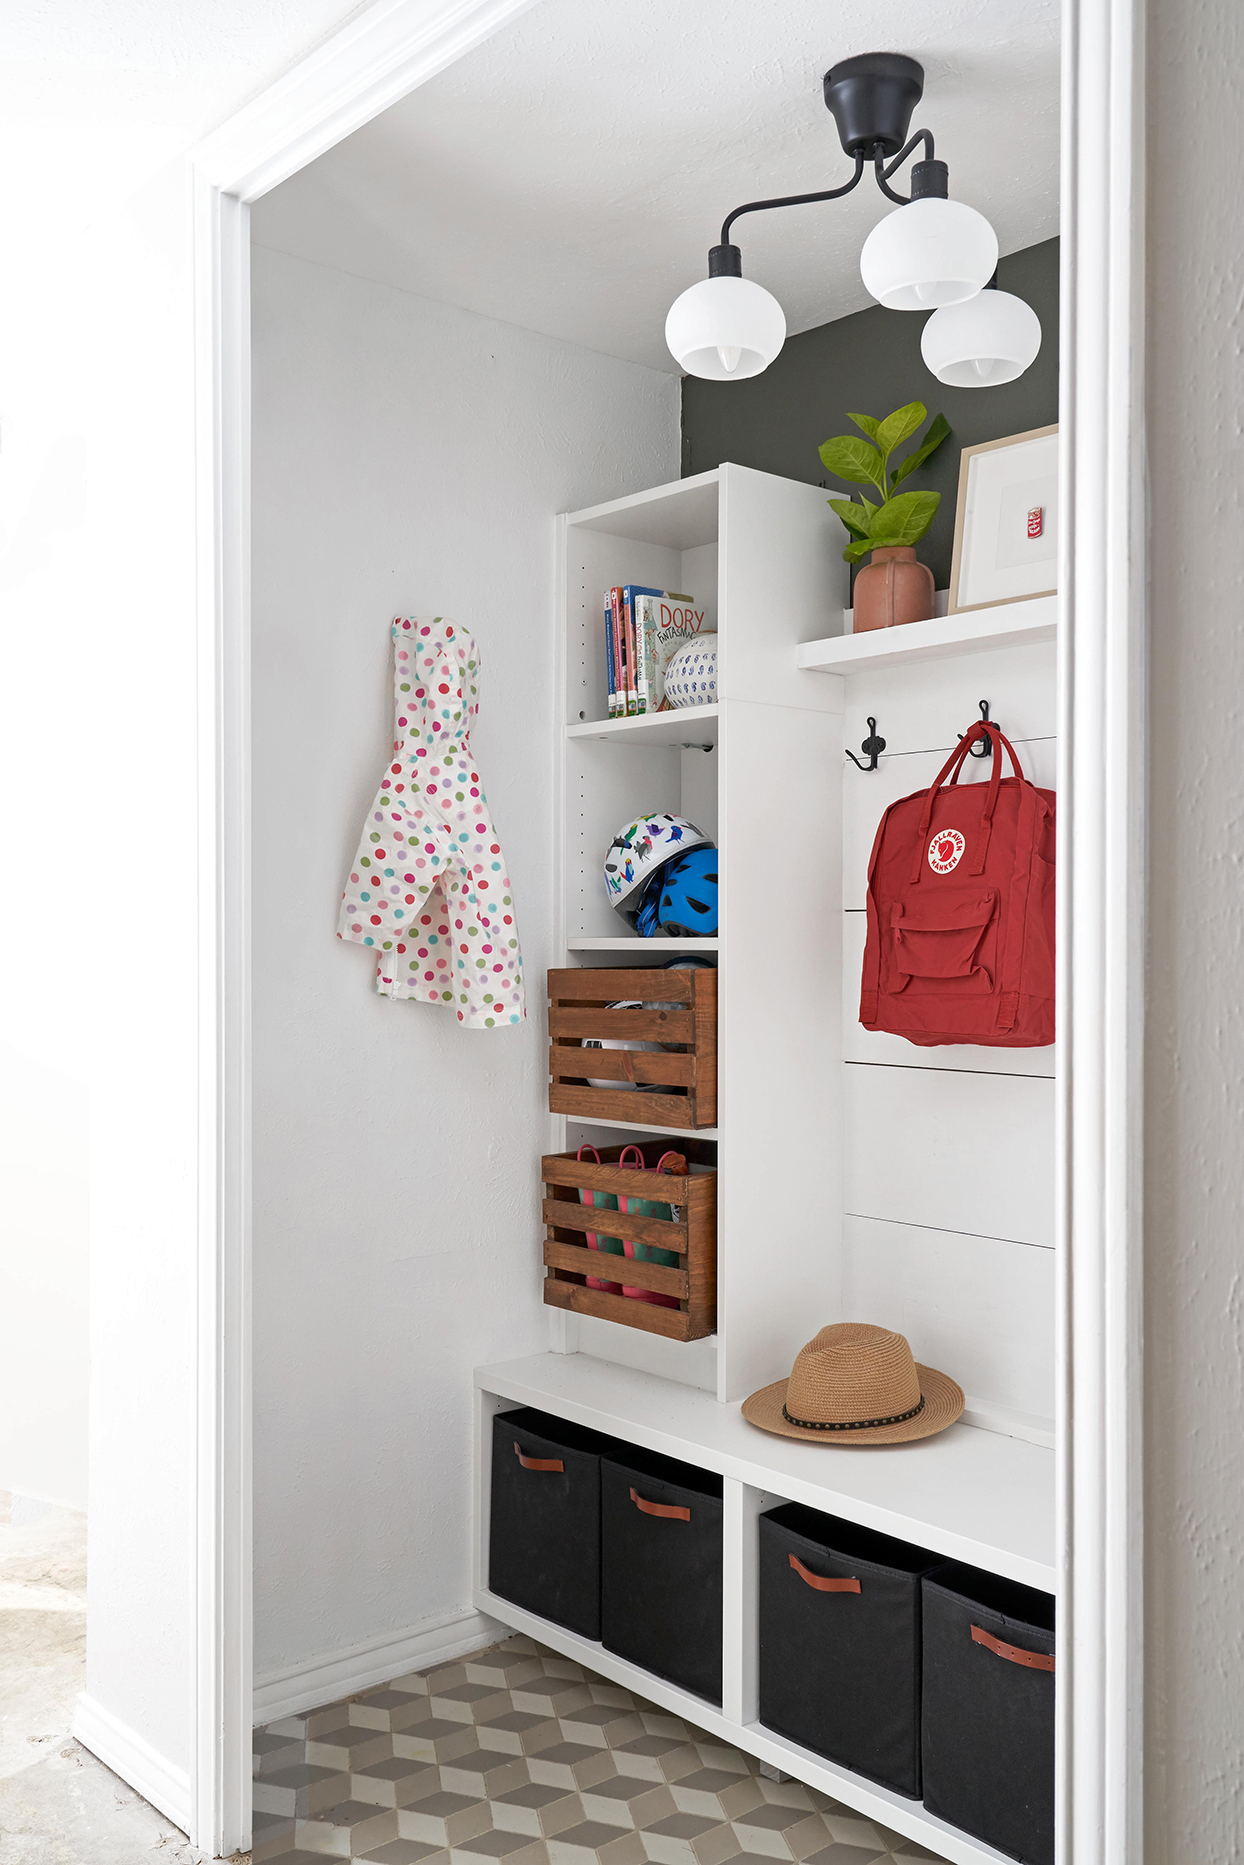 Entryway with large built-in storage for hats, bags, and coats.